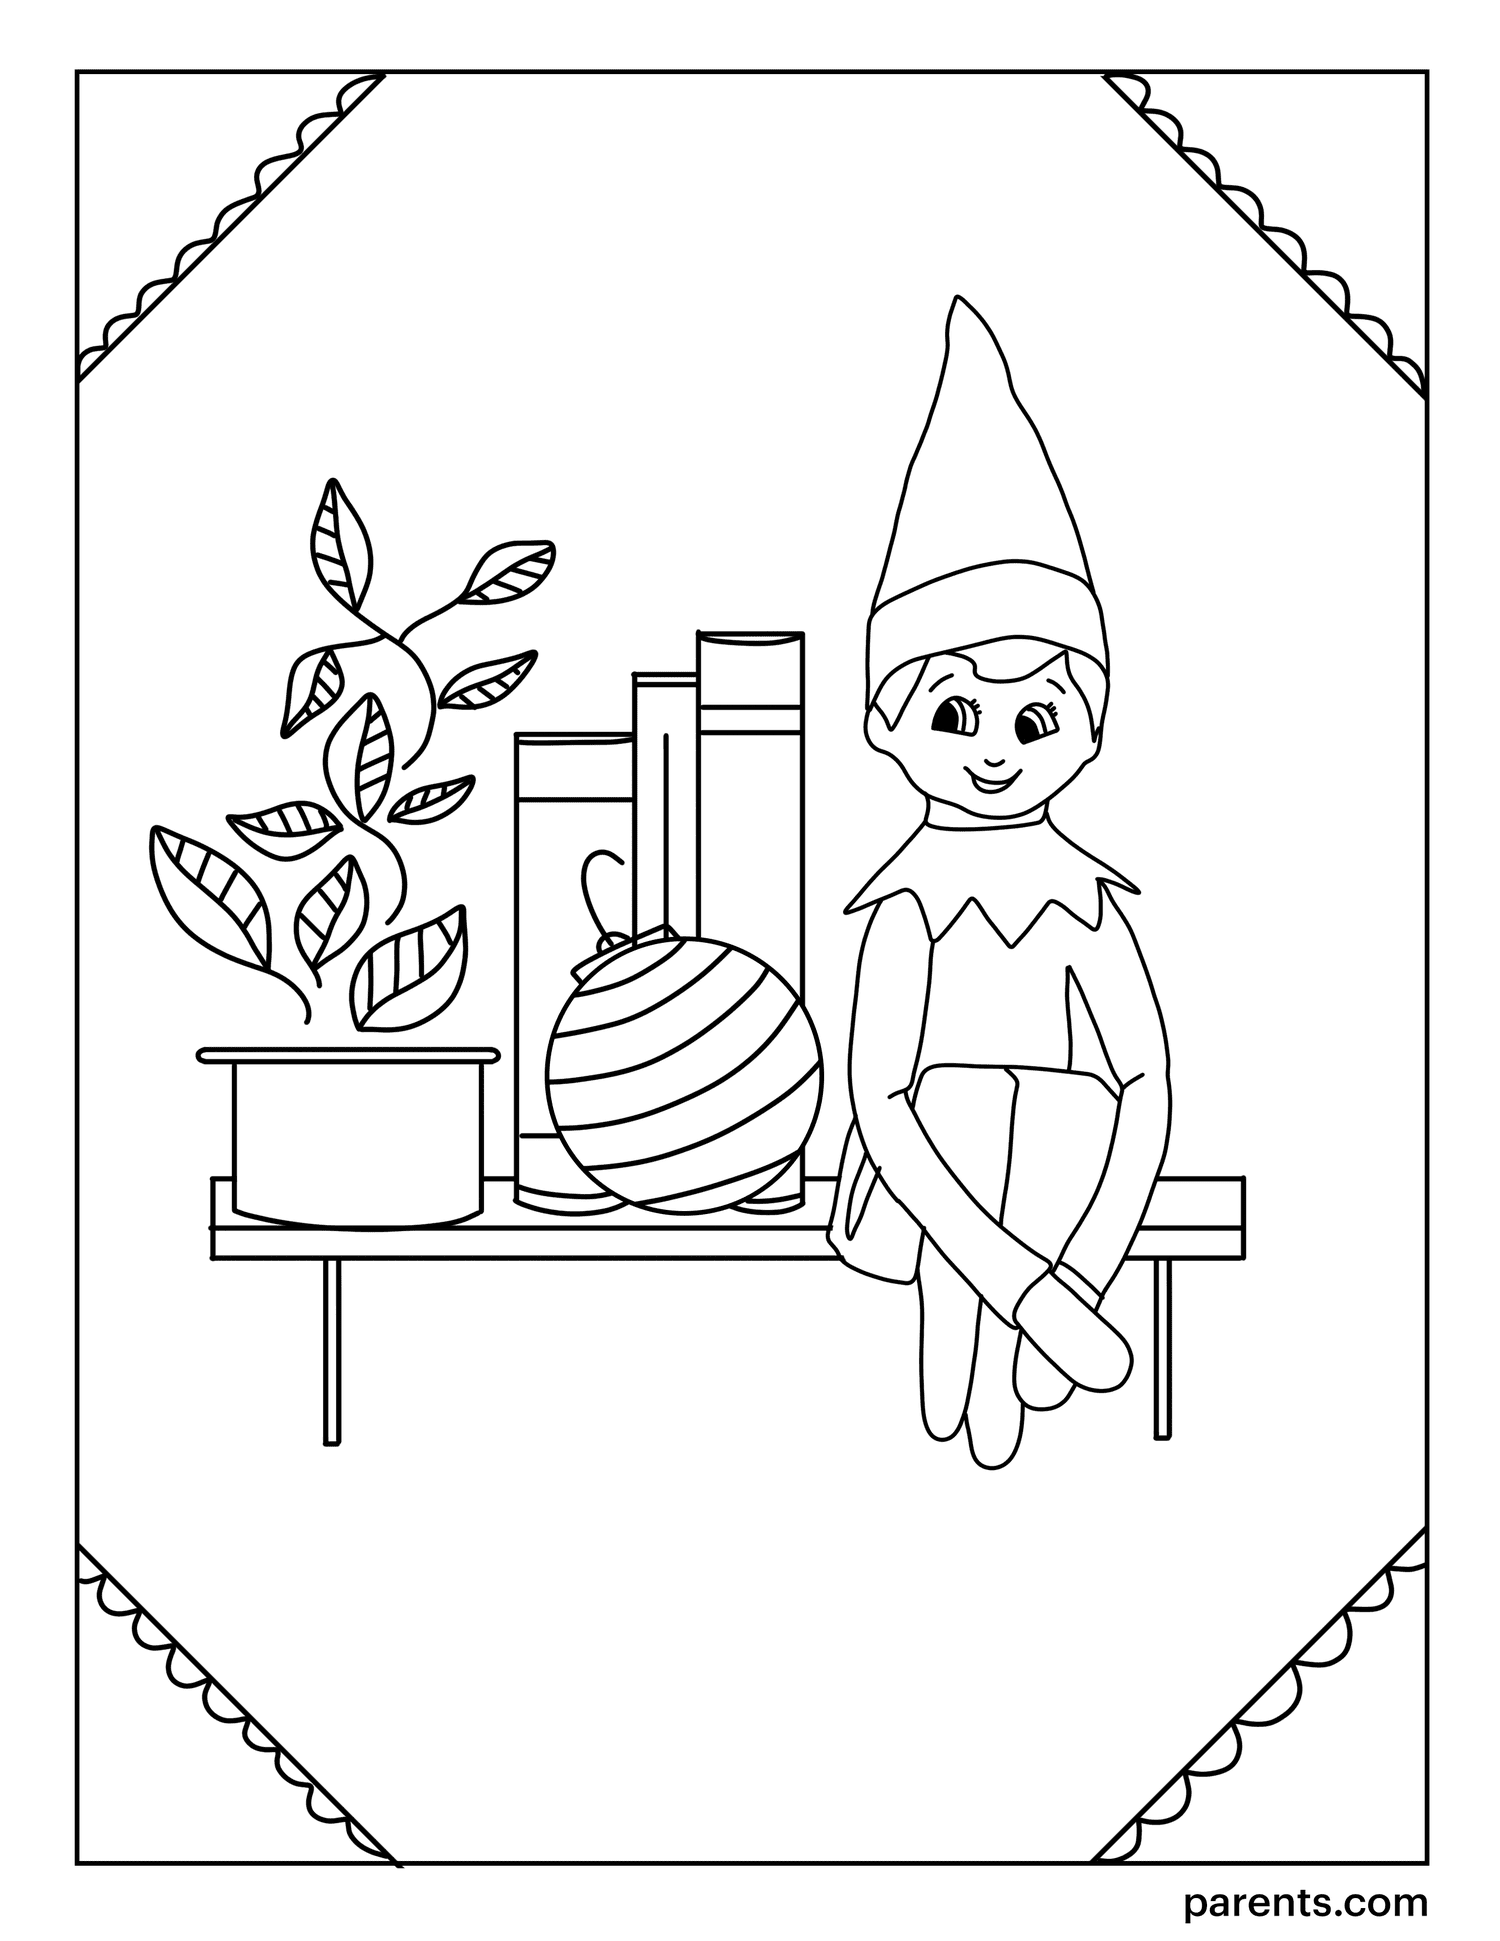 7-elf-on-the-shelf-inspired-coloring-pages-to-get-kids-excited-for